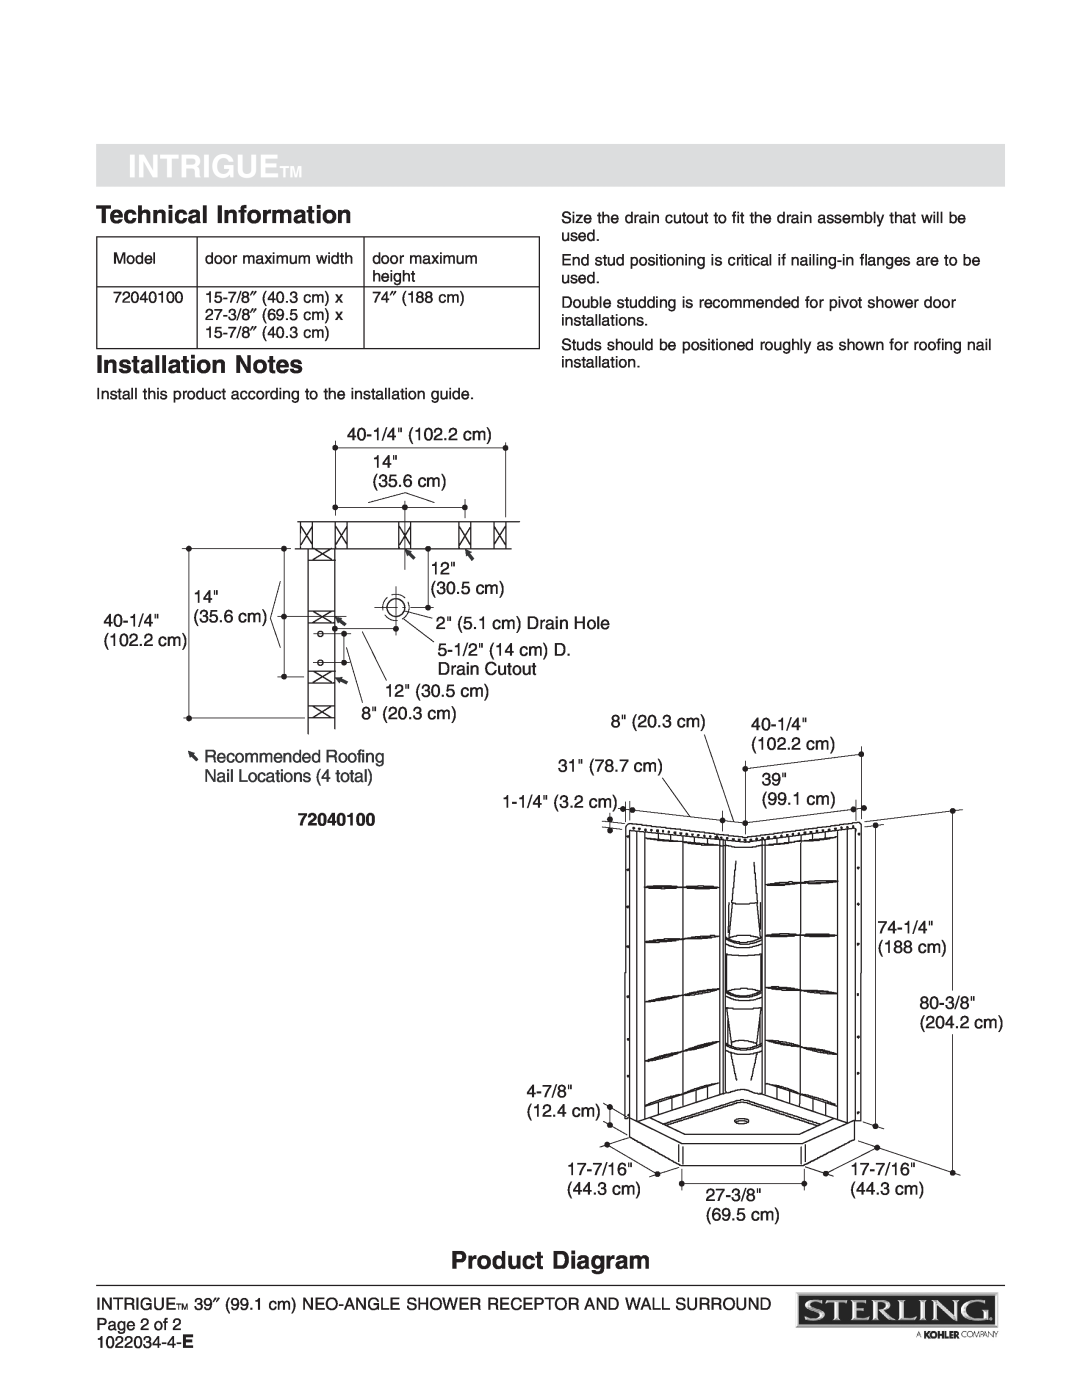 Sterling Plumbing 72040100 warranty Technical Information, Installation Notes, Product Diagram, Intriguetm 